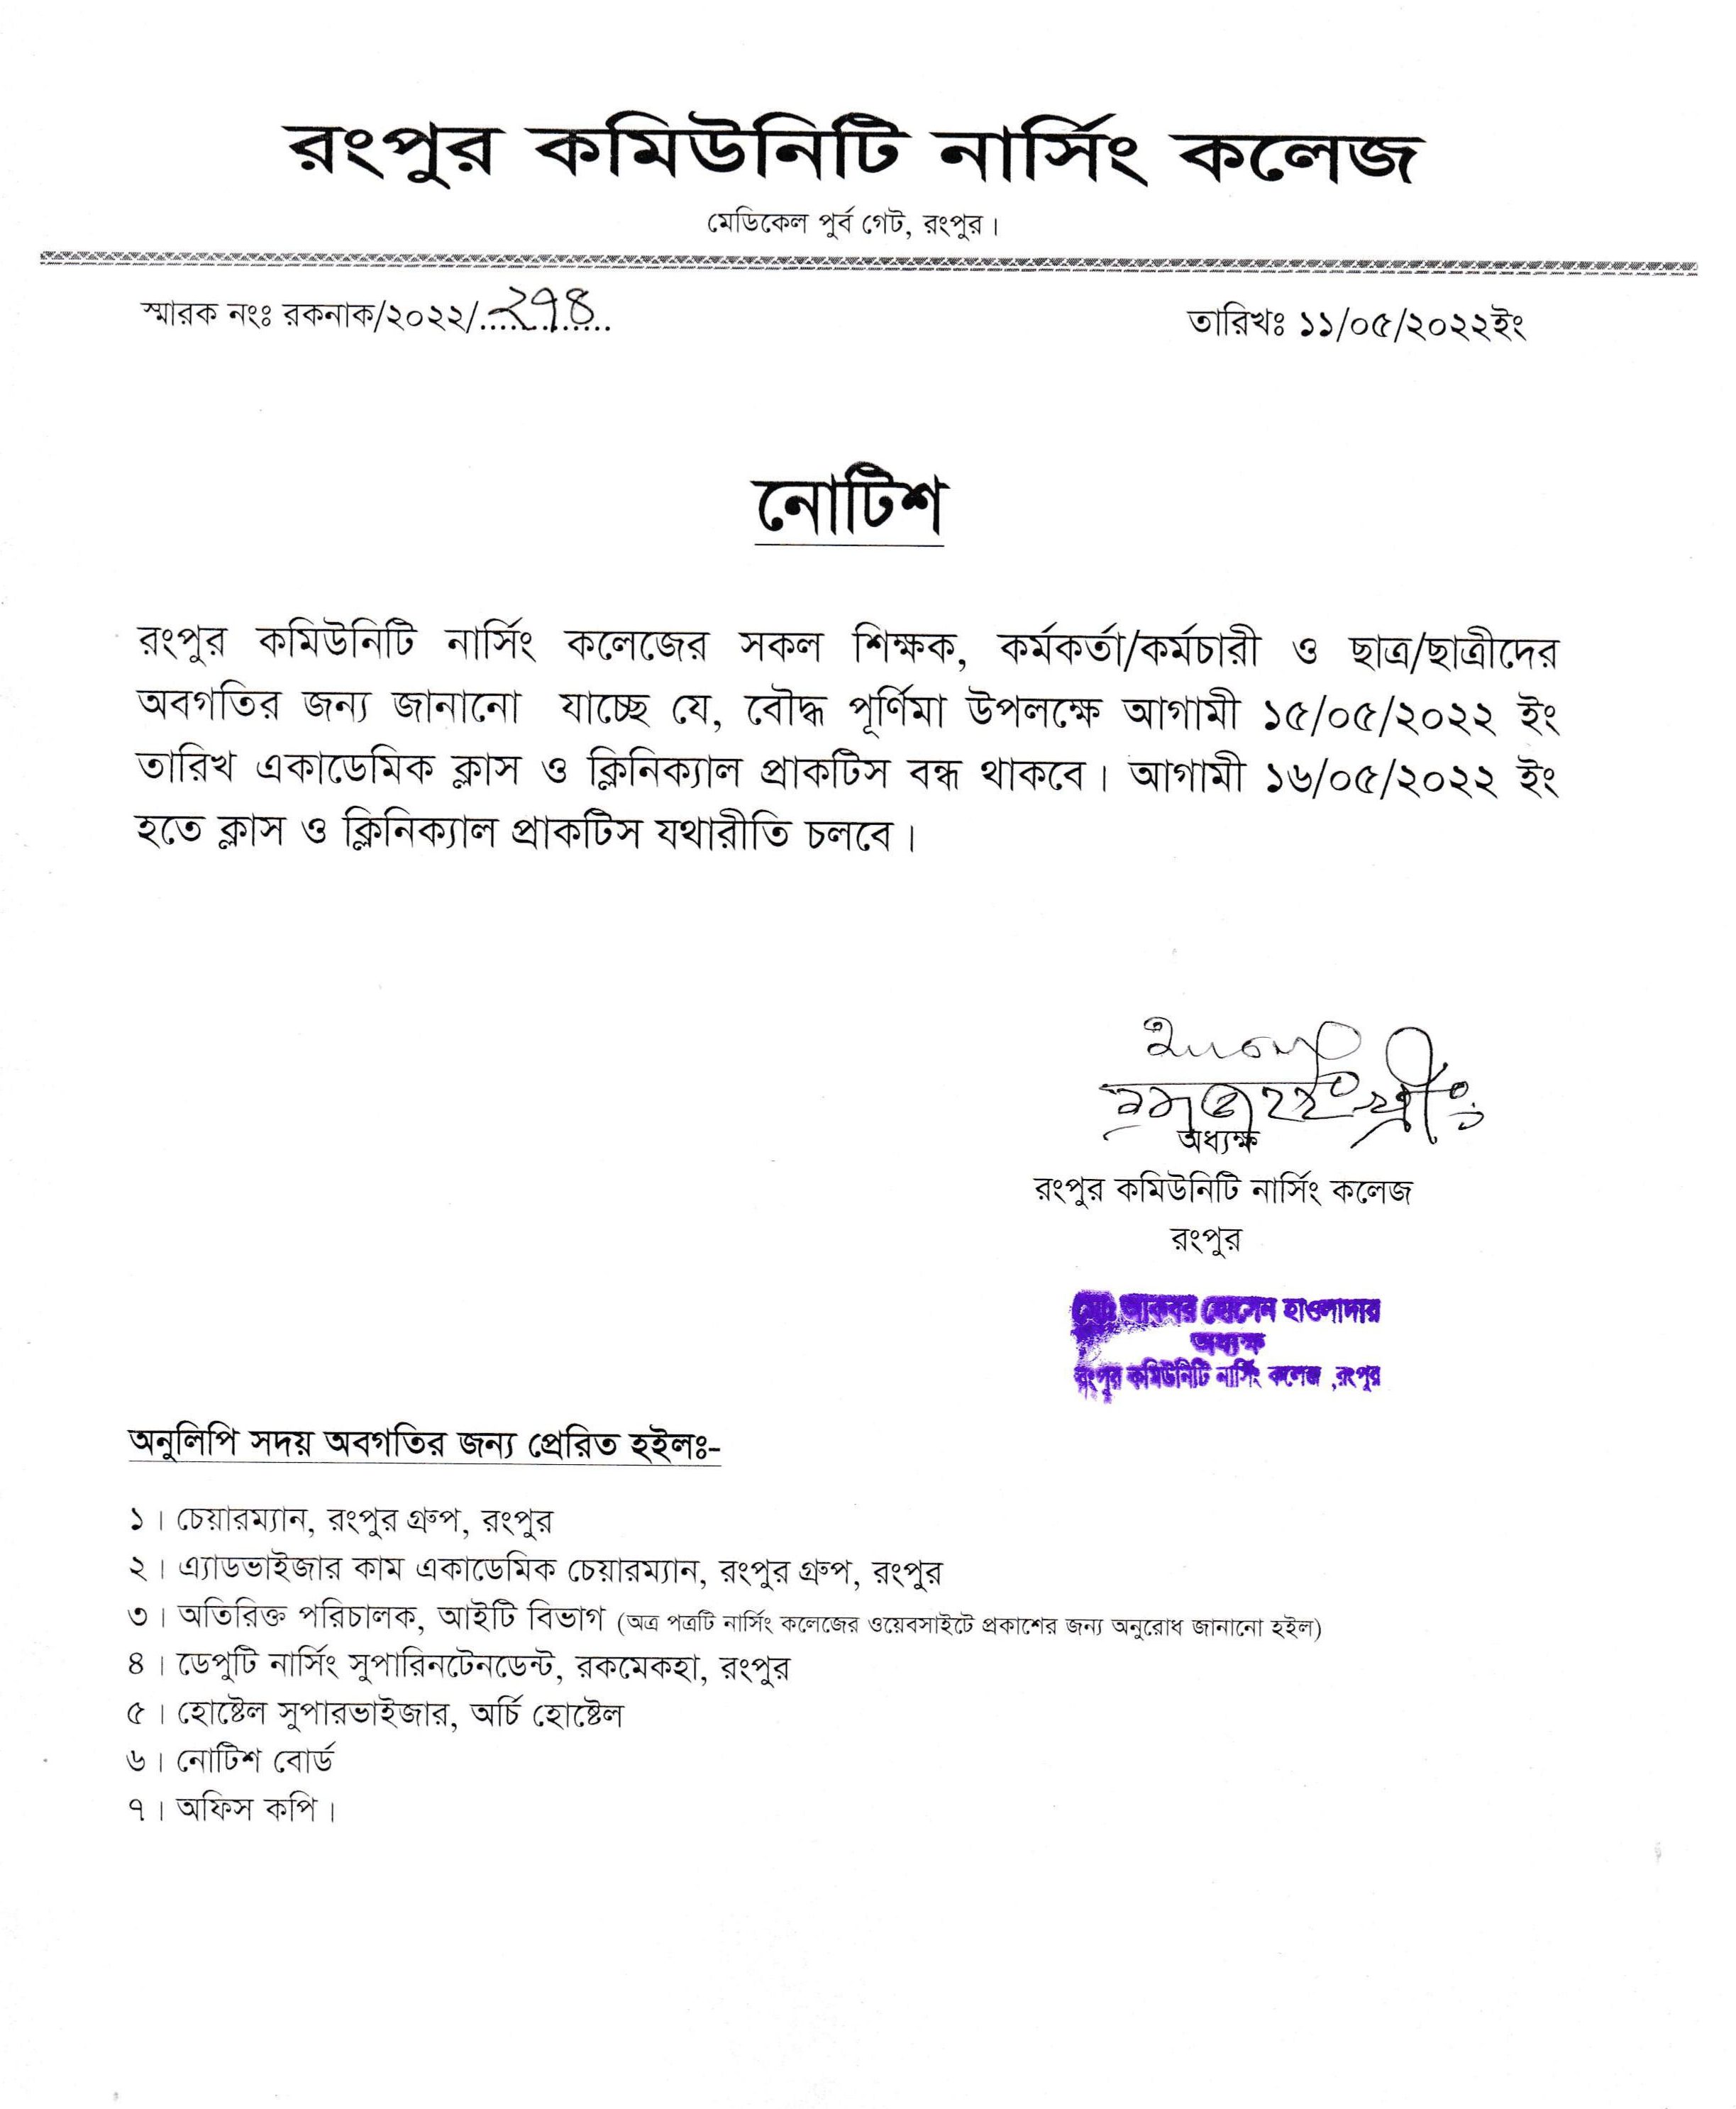 RCNC Notice of Holiday on 15 May 2022